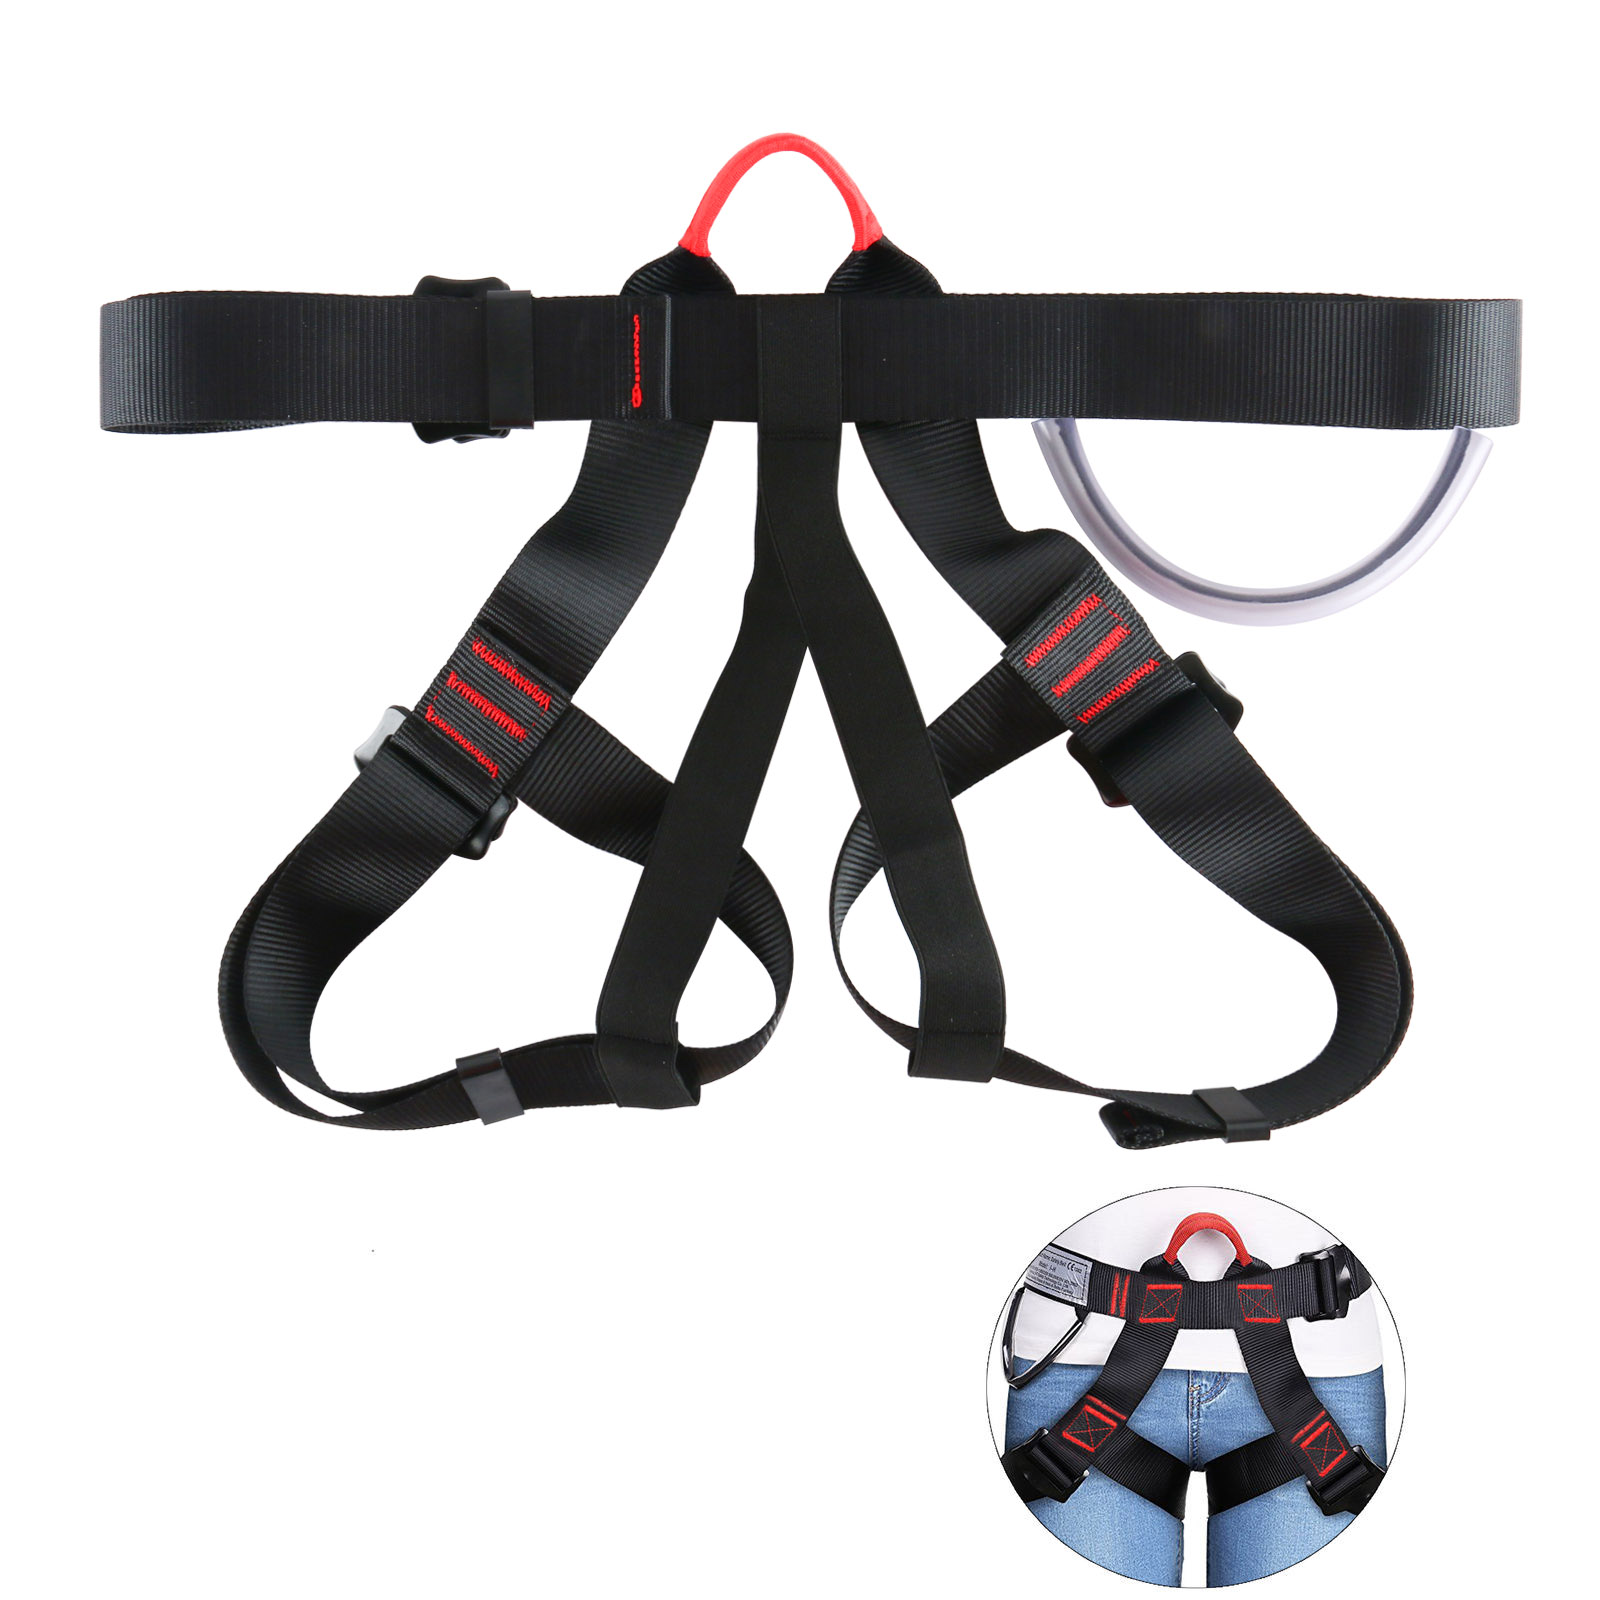 Safety Belt Rescue Safety Belt Outdoor Safety Strap Fire Safety Harness Fireproof Firefighters Climbing Belt Nylon Anti‑Falling Strap Outdoor Safety Equipment Safety Harness Kits 